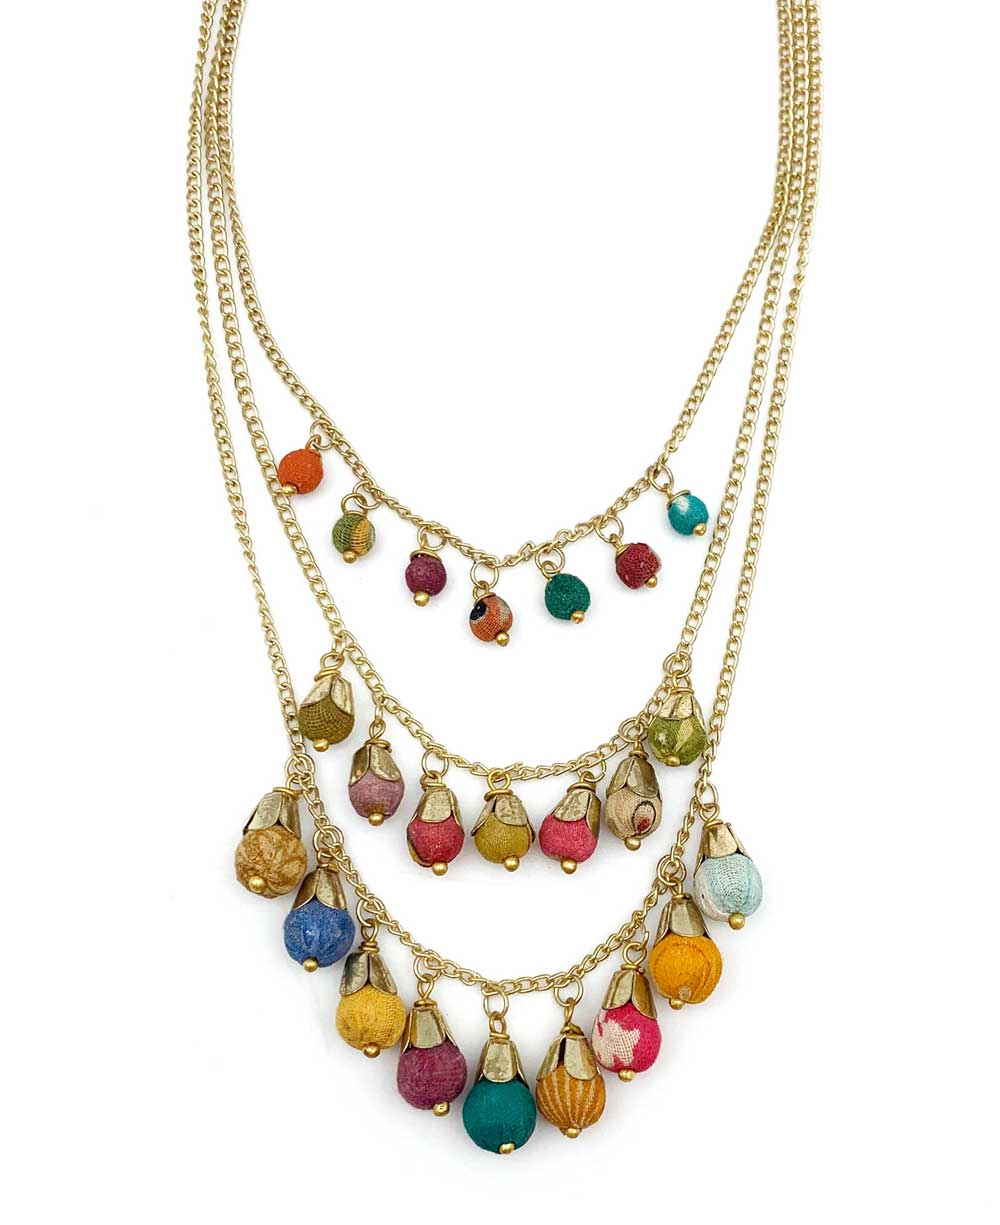 Fairtrade layered necklace with colorful beads